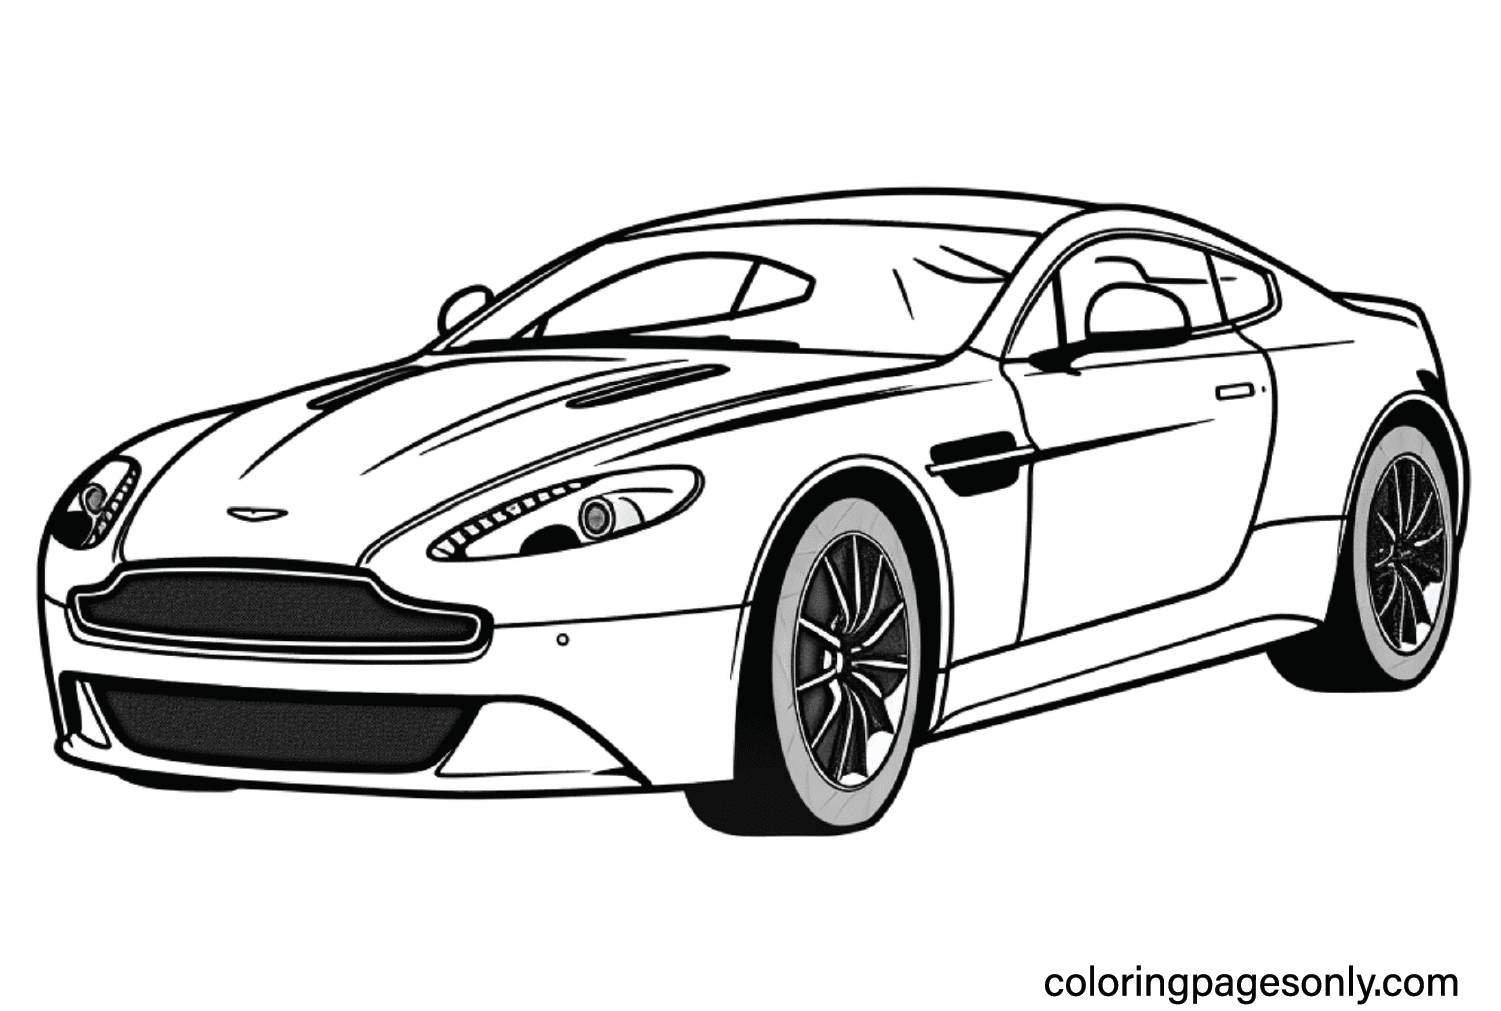 Aston Martin Vantage Coloring Page - Free Printable Coloring Pages